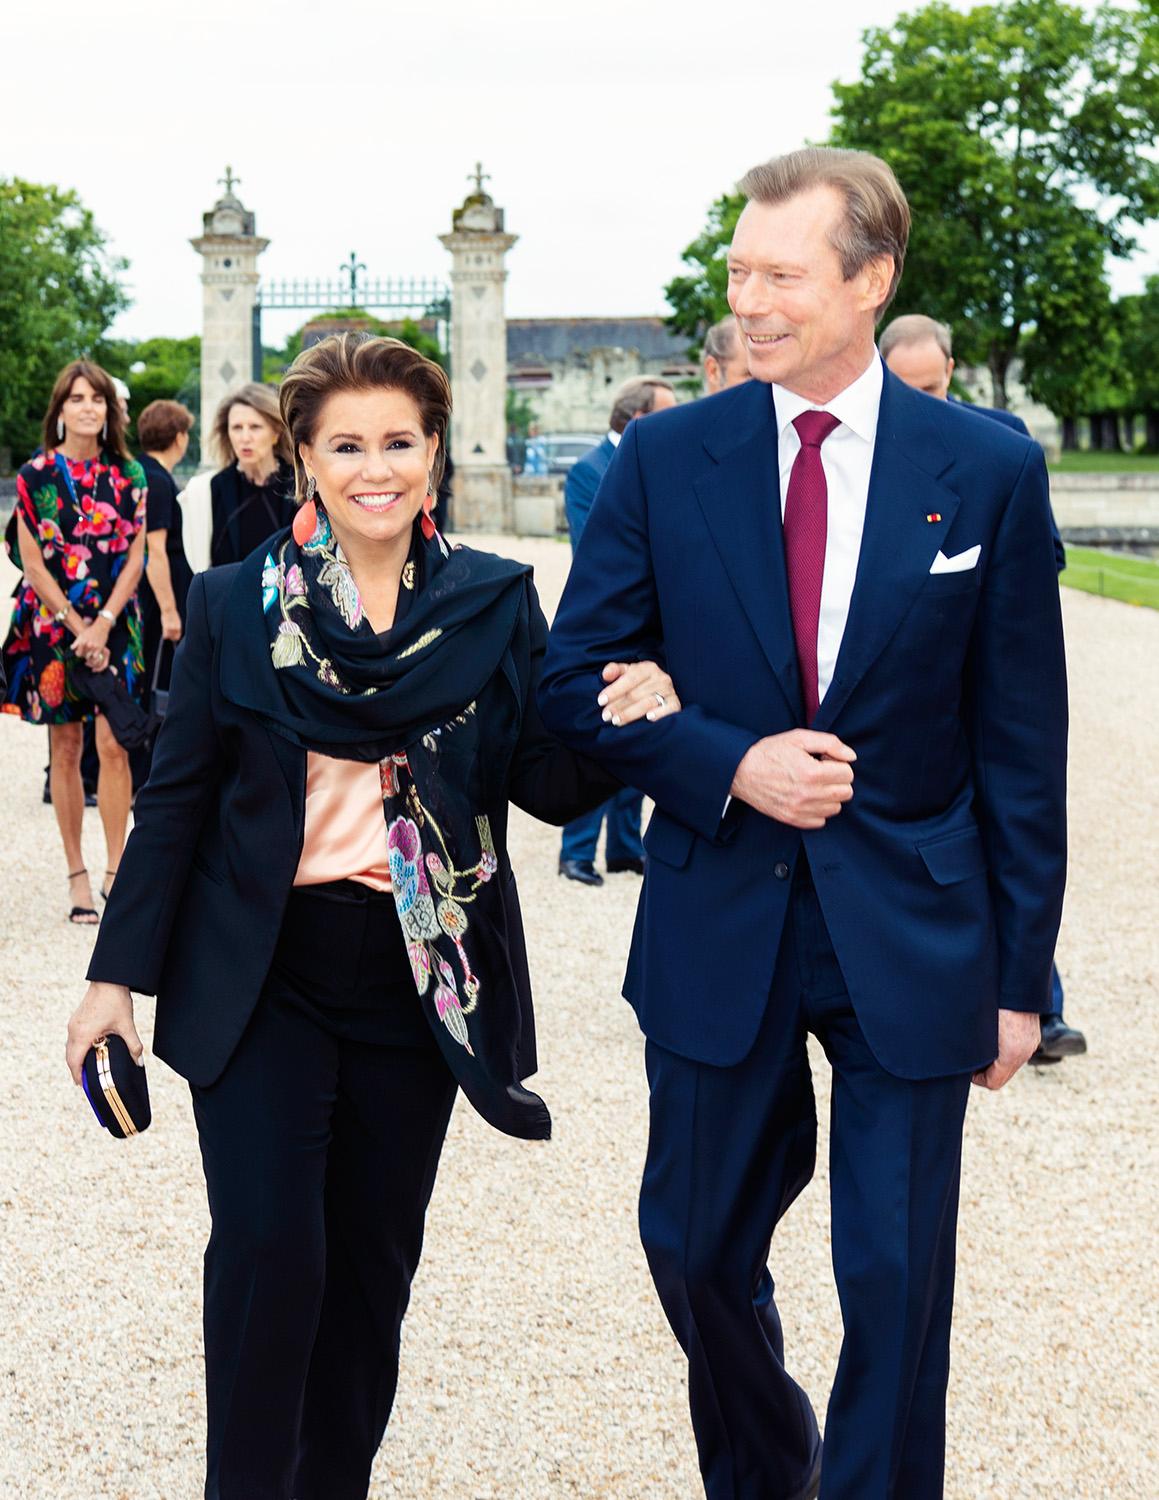 The Grand Duke and Grand Duchess at the celebration of the 500th anniversary of the Chambord Castle